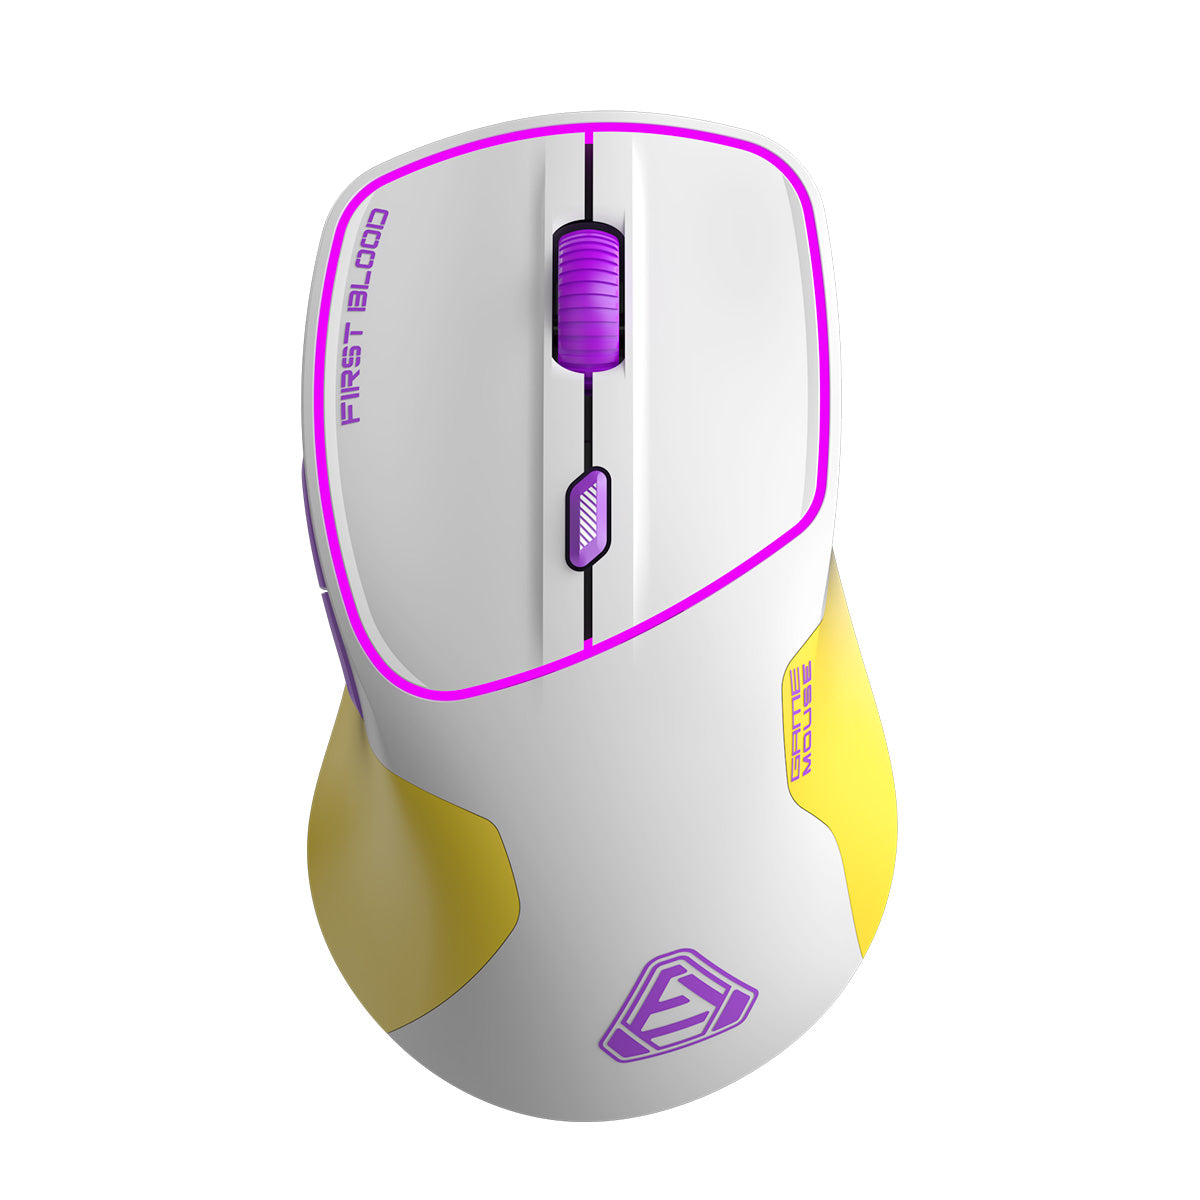 FIRSTBLOOD ONLY GAME. AJ380 69g Lightweight Gaming Mouse with Honeycomb  Shell, RGB Backlit, 16000 DPI PixArt 3338 Sensor, Programmable 6 Buttons